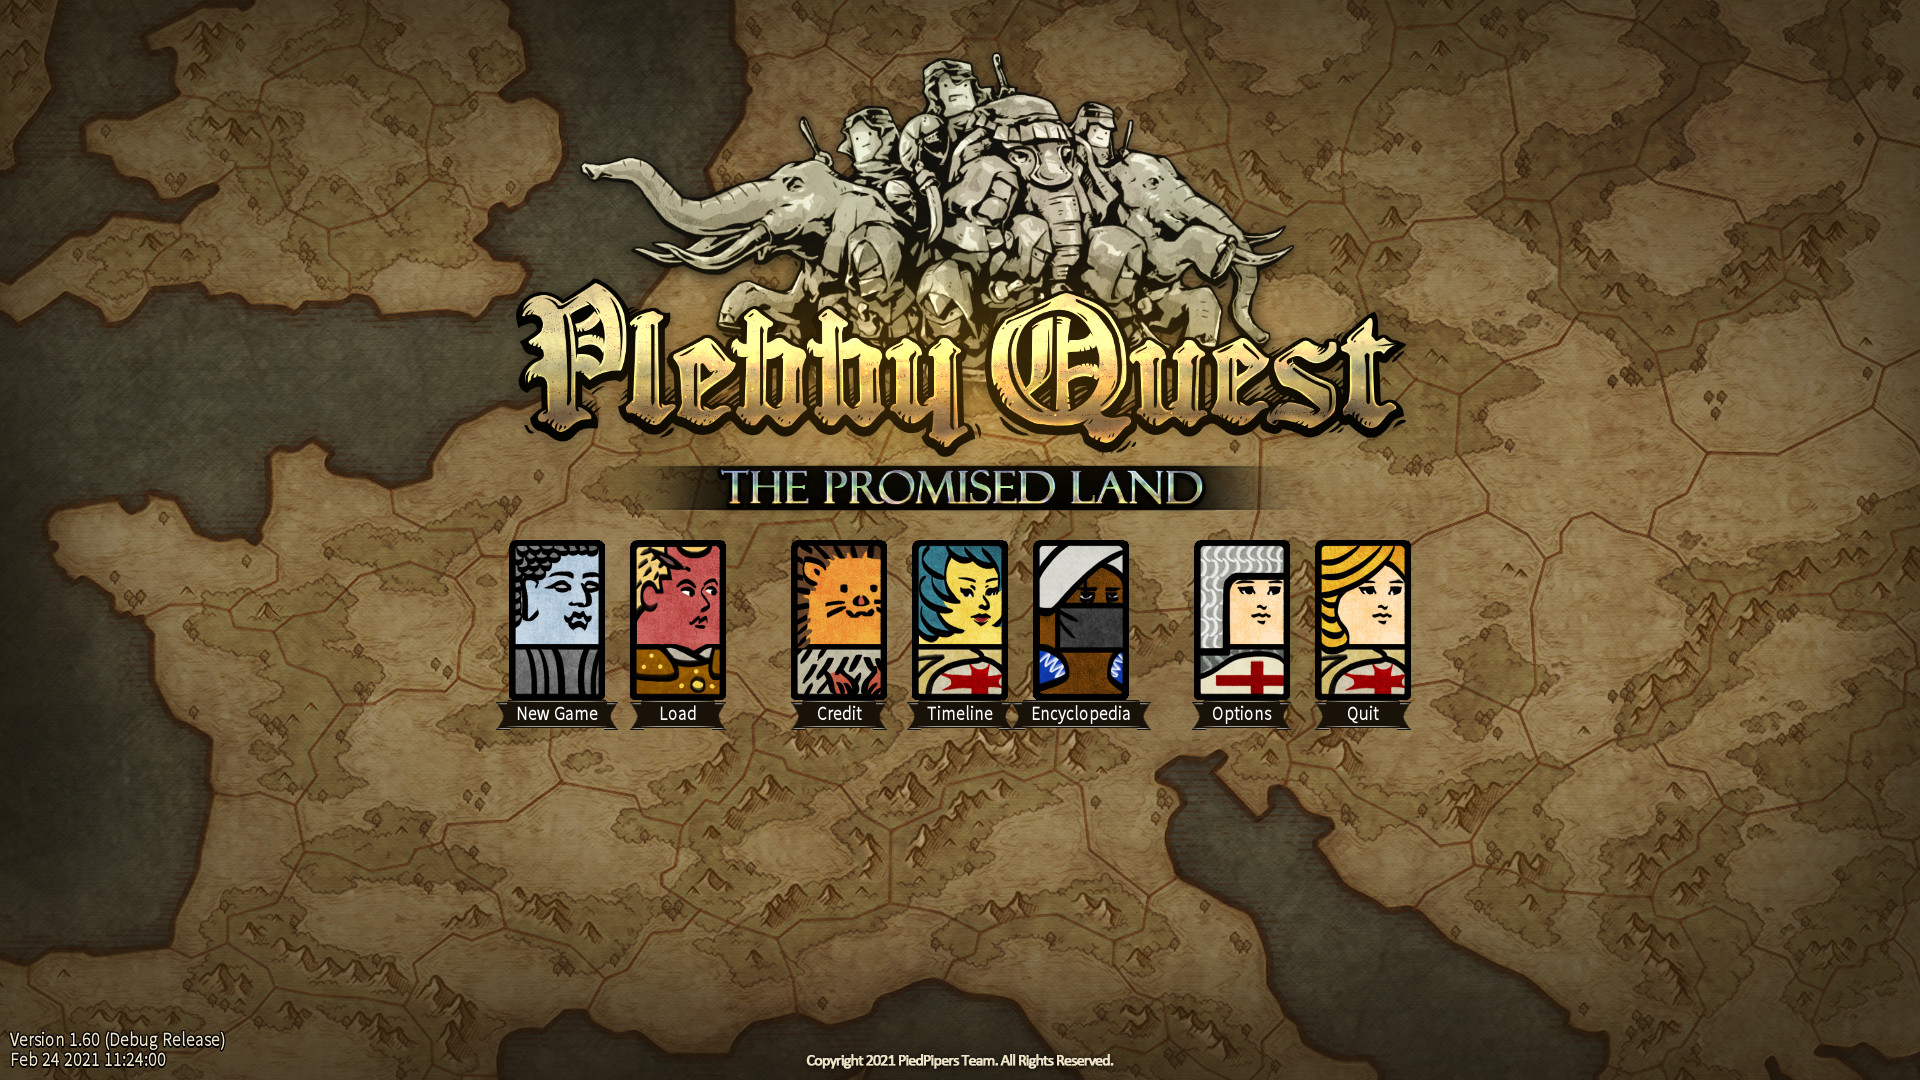 Plebby Quest: The Promised Land Featured Screenshot #1